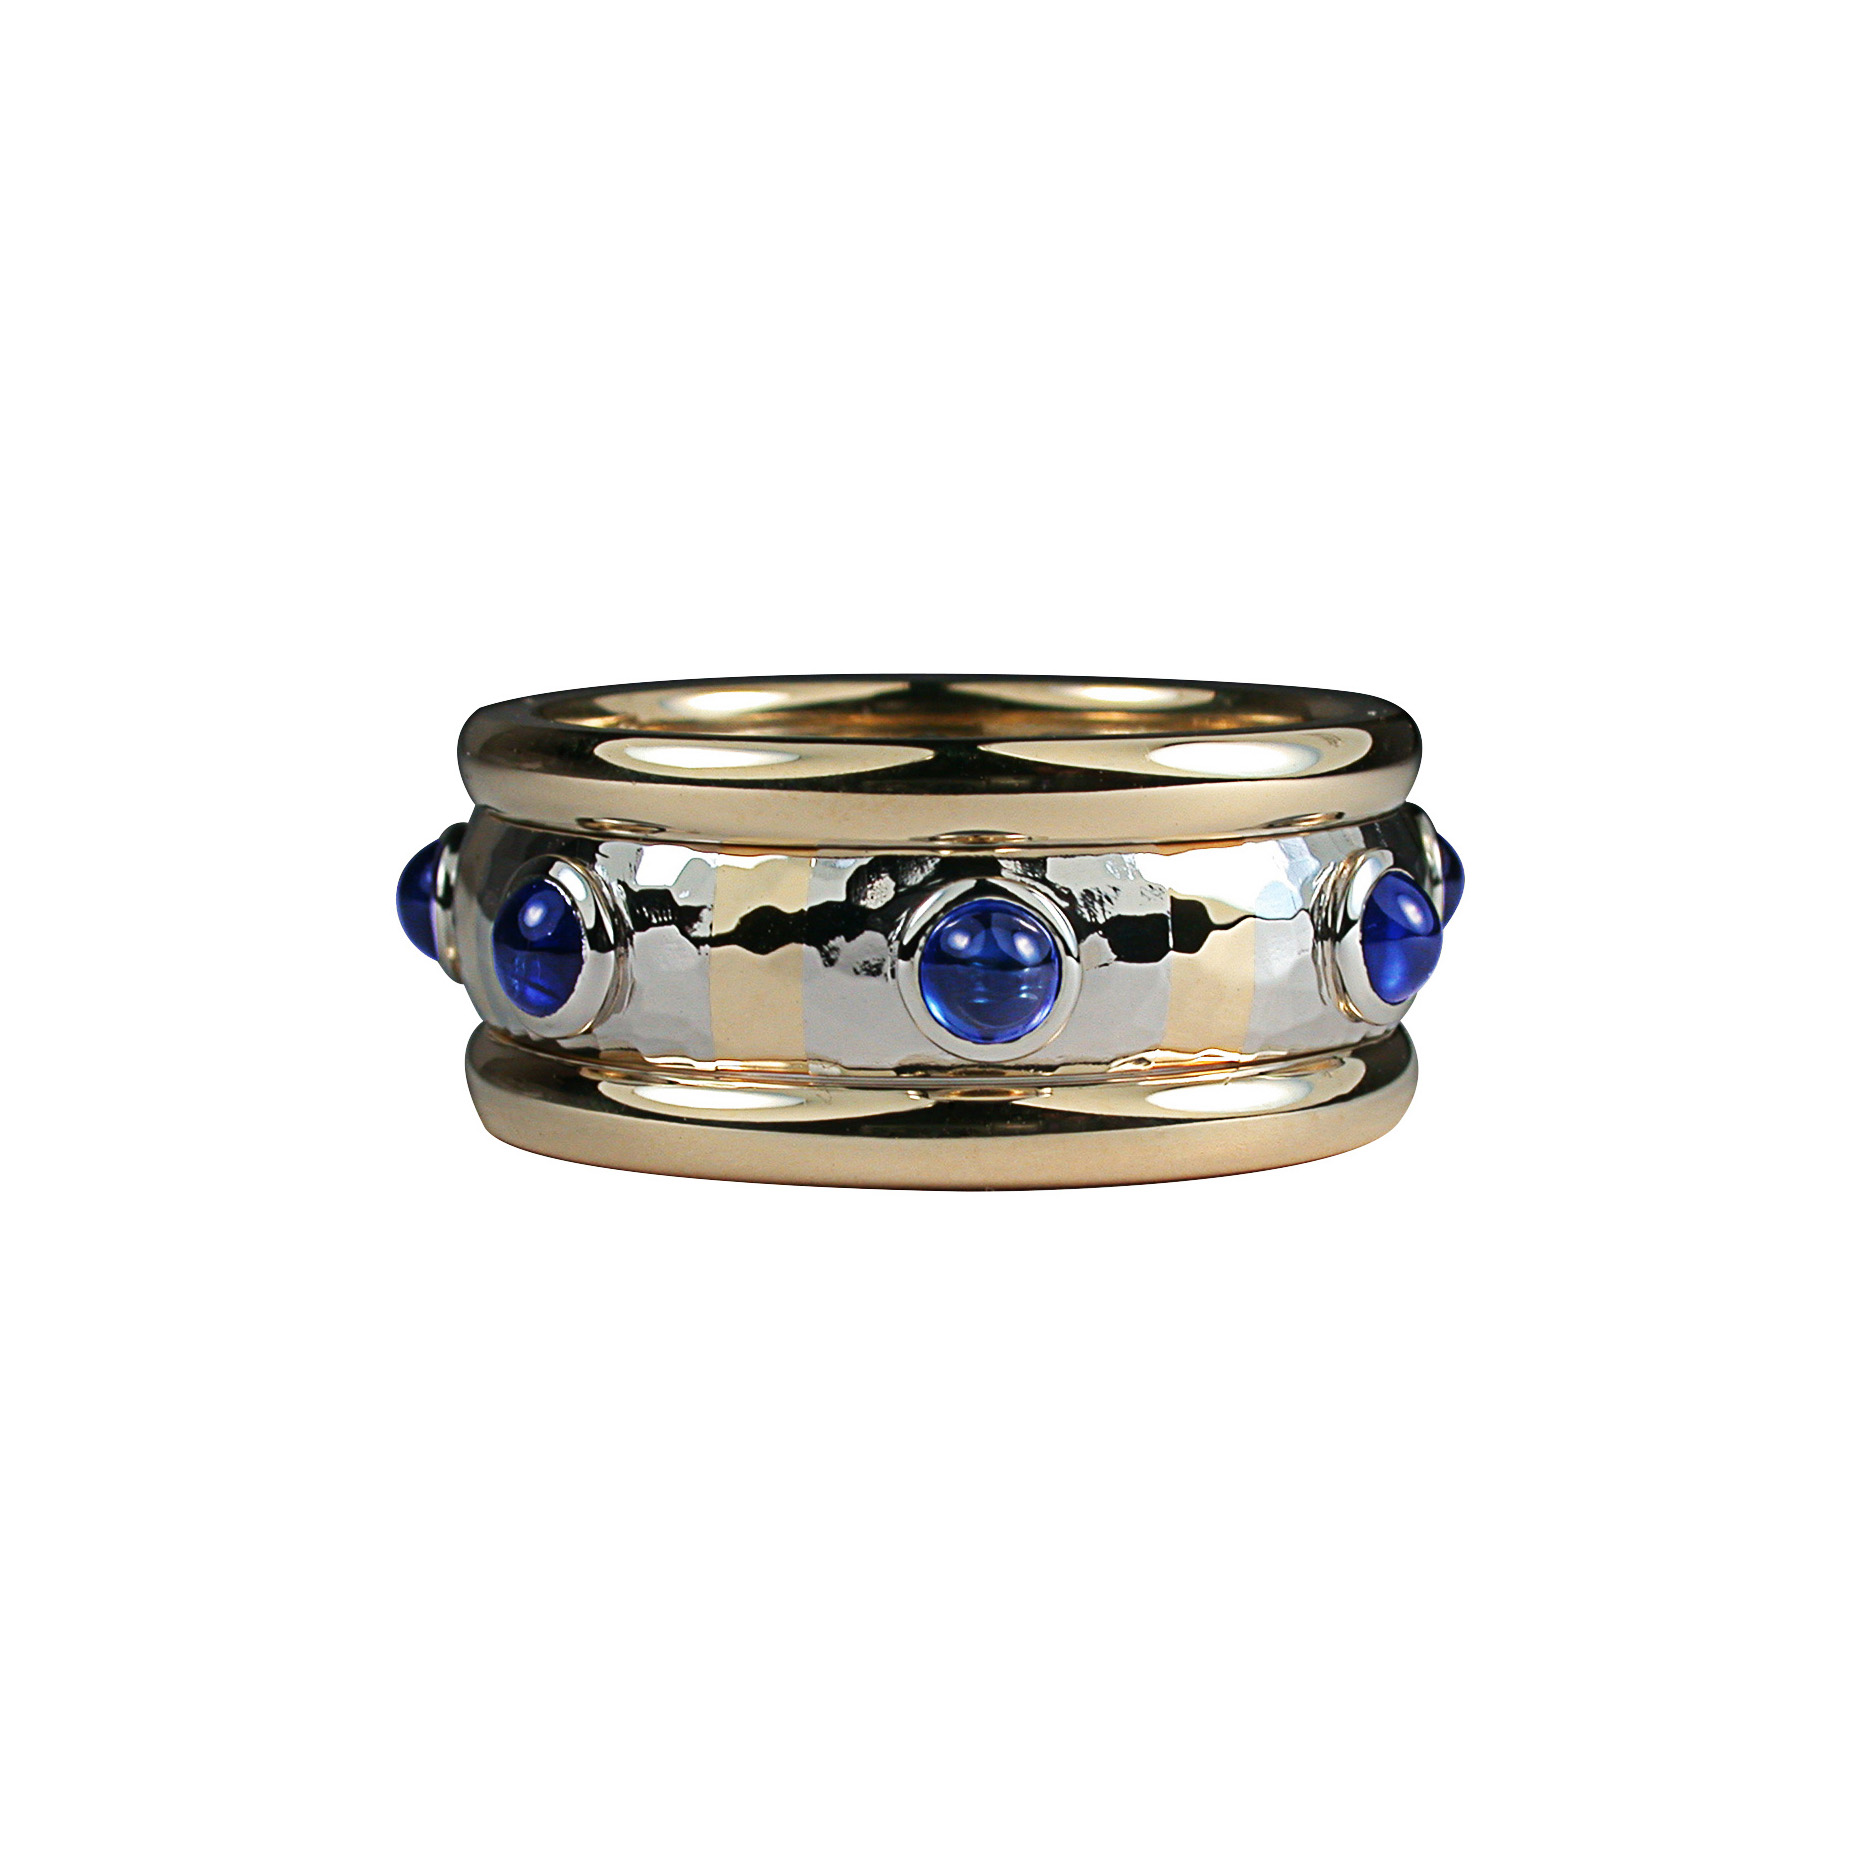 Cabochon blue sapphires in 18K yellow gold and platinum